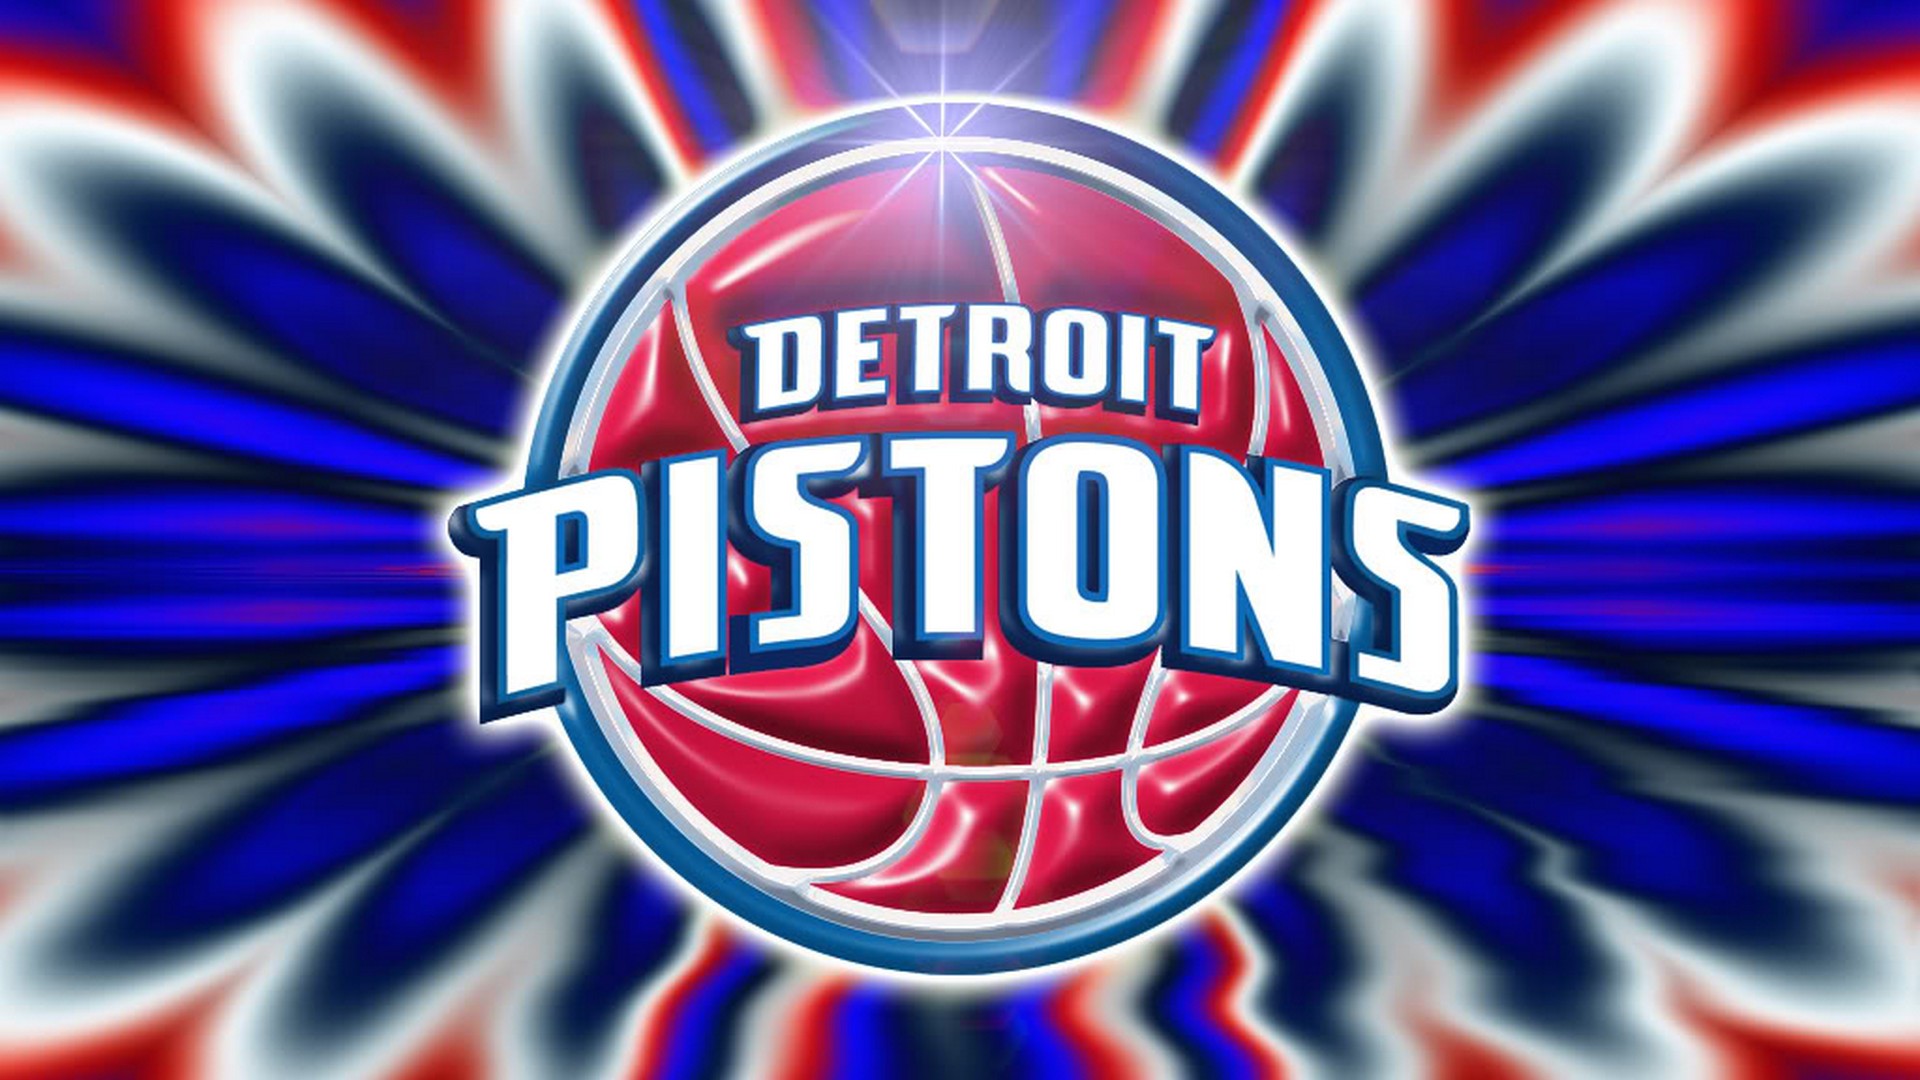 HD Detroit Pistons Logo Wallpapers with high-resolution 1920x1080 pixel. You can use this wallpaper for your Desktop Computer Backgrounds, Windows or Mac Screensavers, iPhone Lock screen, Tablet or Android and another Mobile Phone device